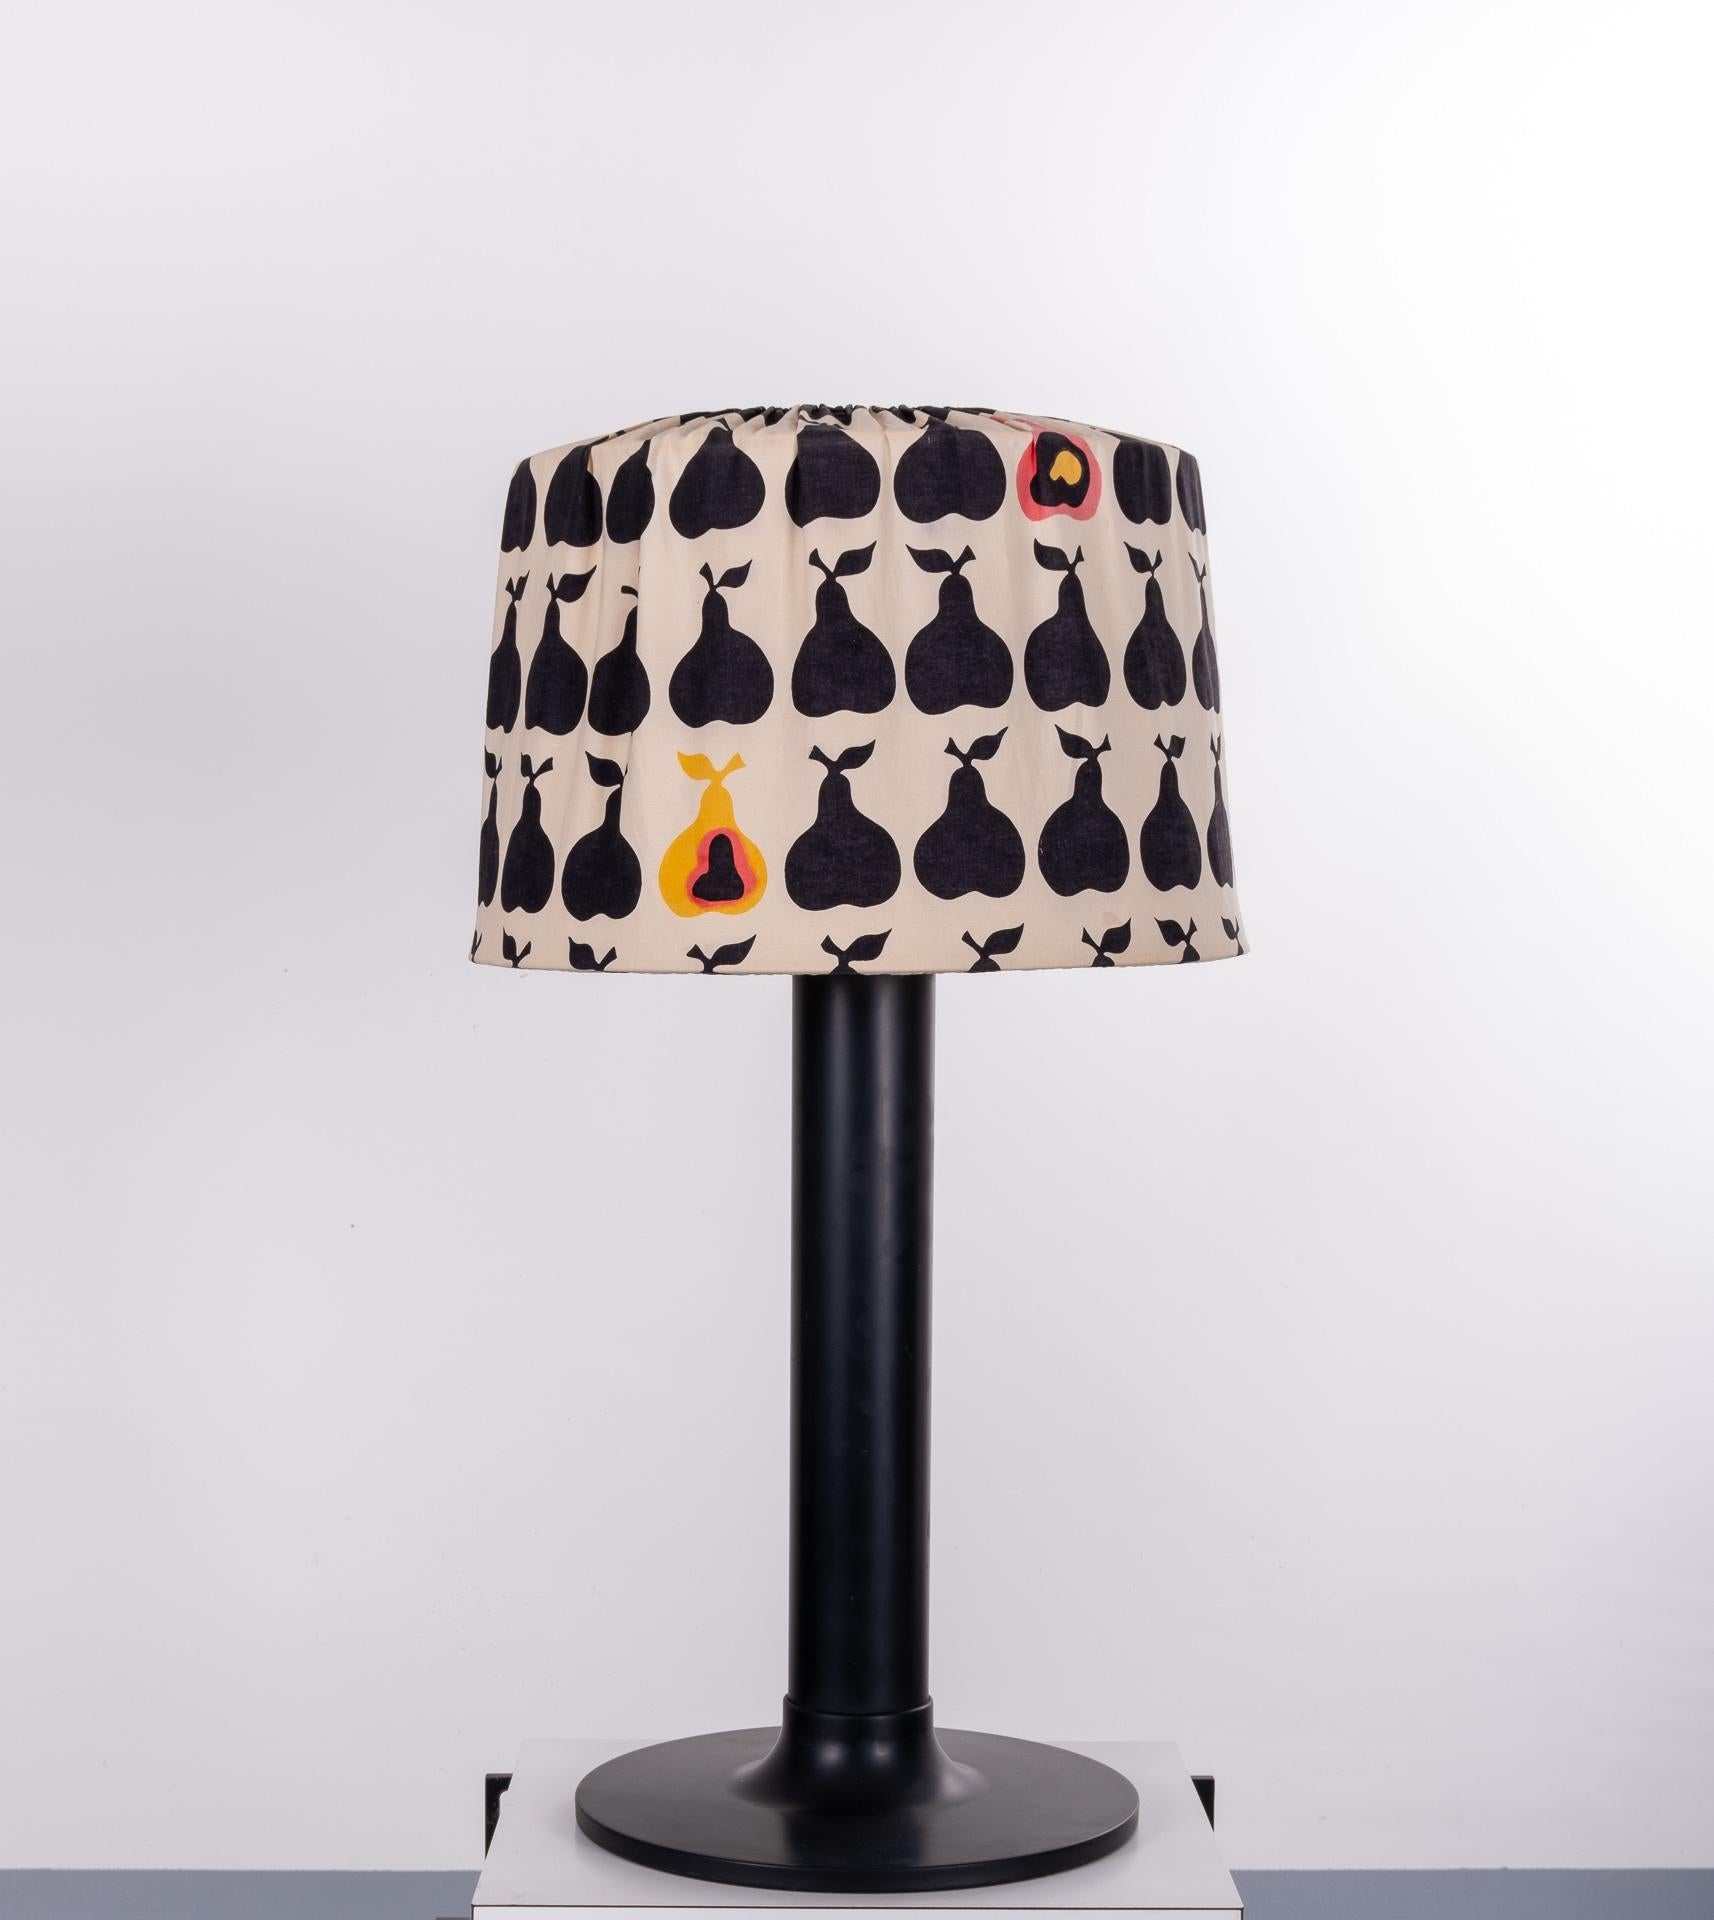 Still together this lovely aluminum Tulip shaped lamp base, and his original fabric shade. Decorated with pears. Very rare set.
In black yellow and pink. So stylish. Both signed, with the great Swedish designer Hans-Agne Jacobsson
No discoloration